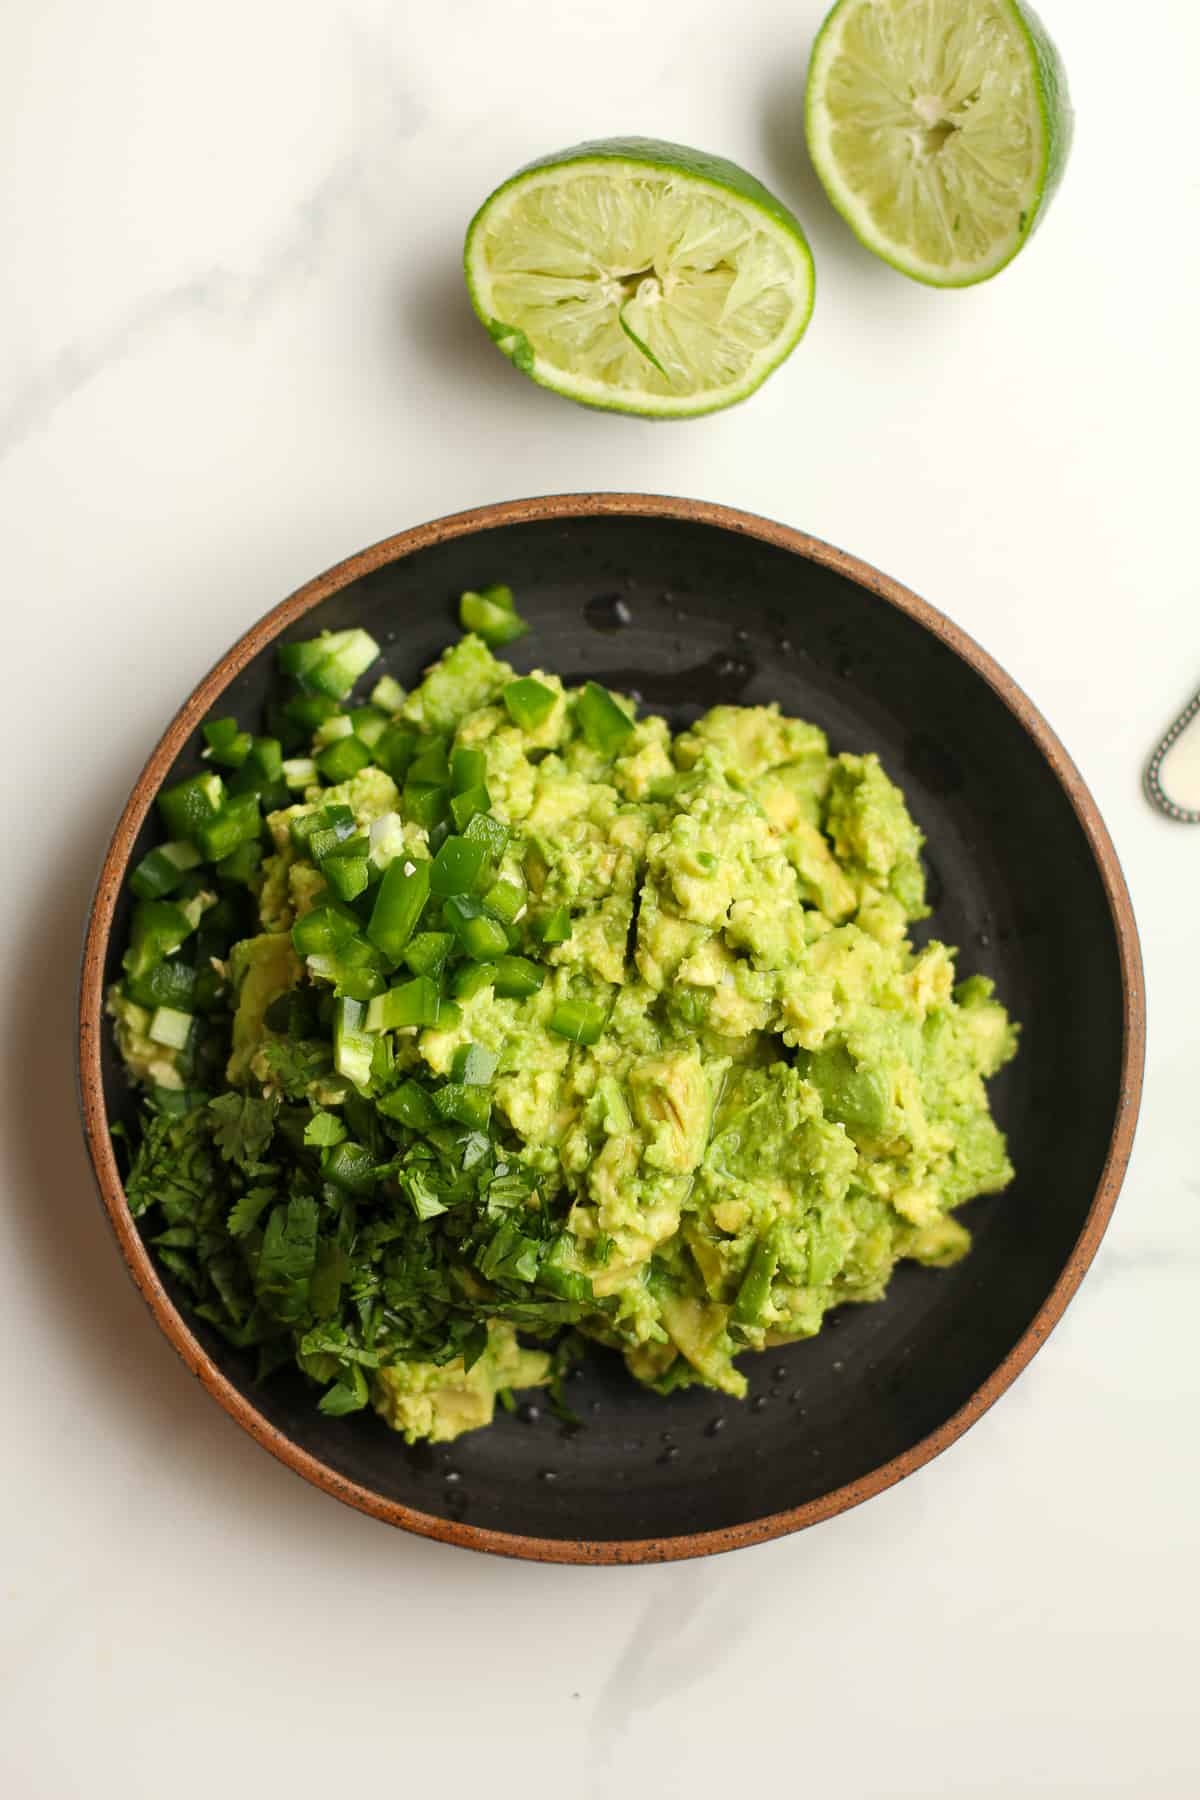 A black bowl of the chunky avocado with jalapeño and cilantro on top.